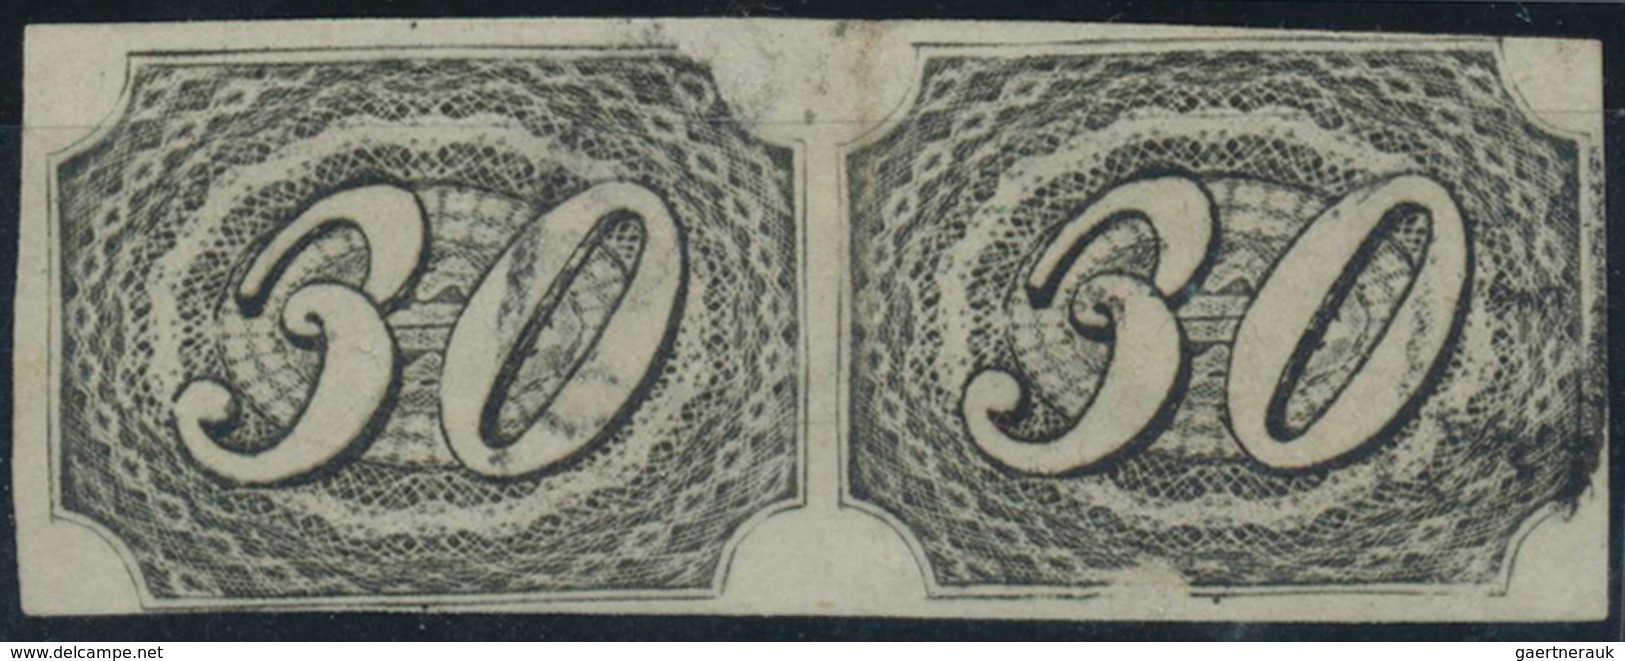 22284 Brasilien: 1843-1990, Collection starting Bull's eye first issue with mint and used stamps, scarce c